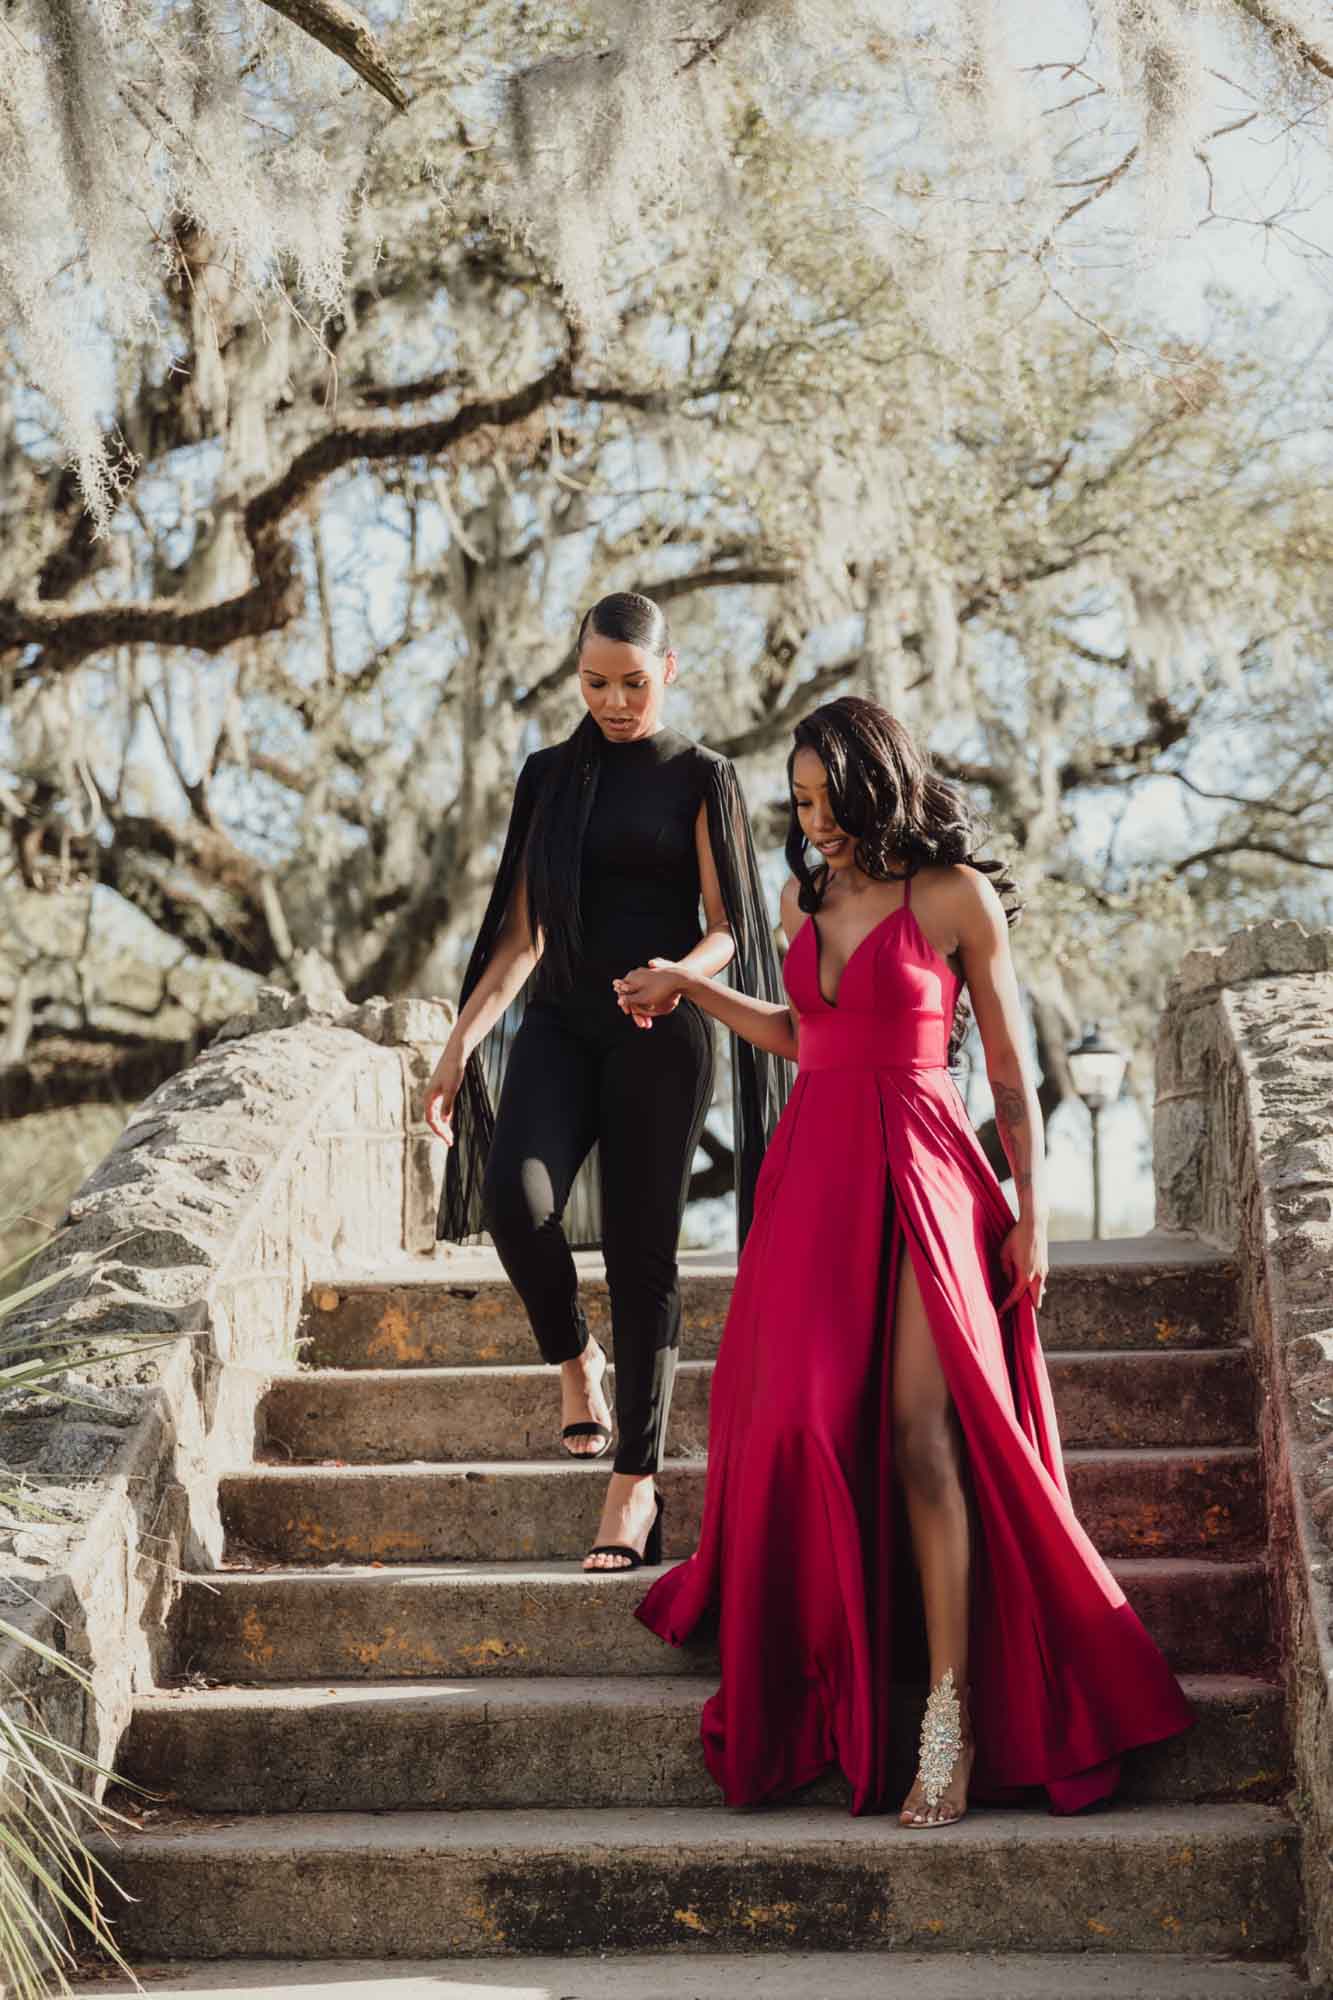 Elegant engagement session after romantic New Year's Eve proposal | Kim and Co. Photo | Featured on Equally Wed, the leading LGBTQ+ wedding magazine